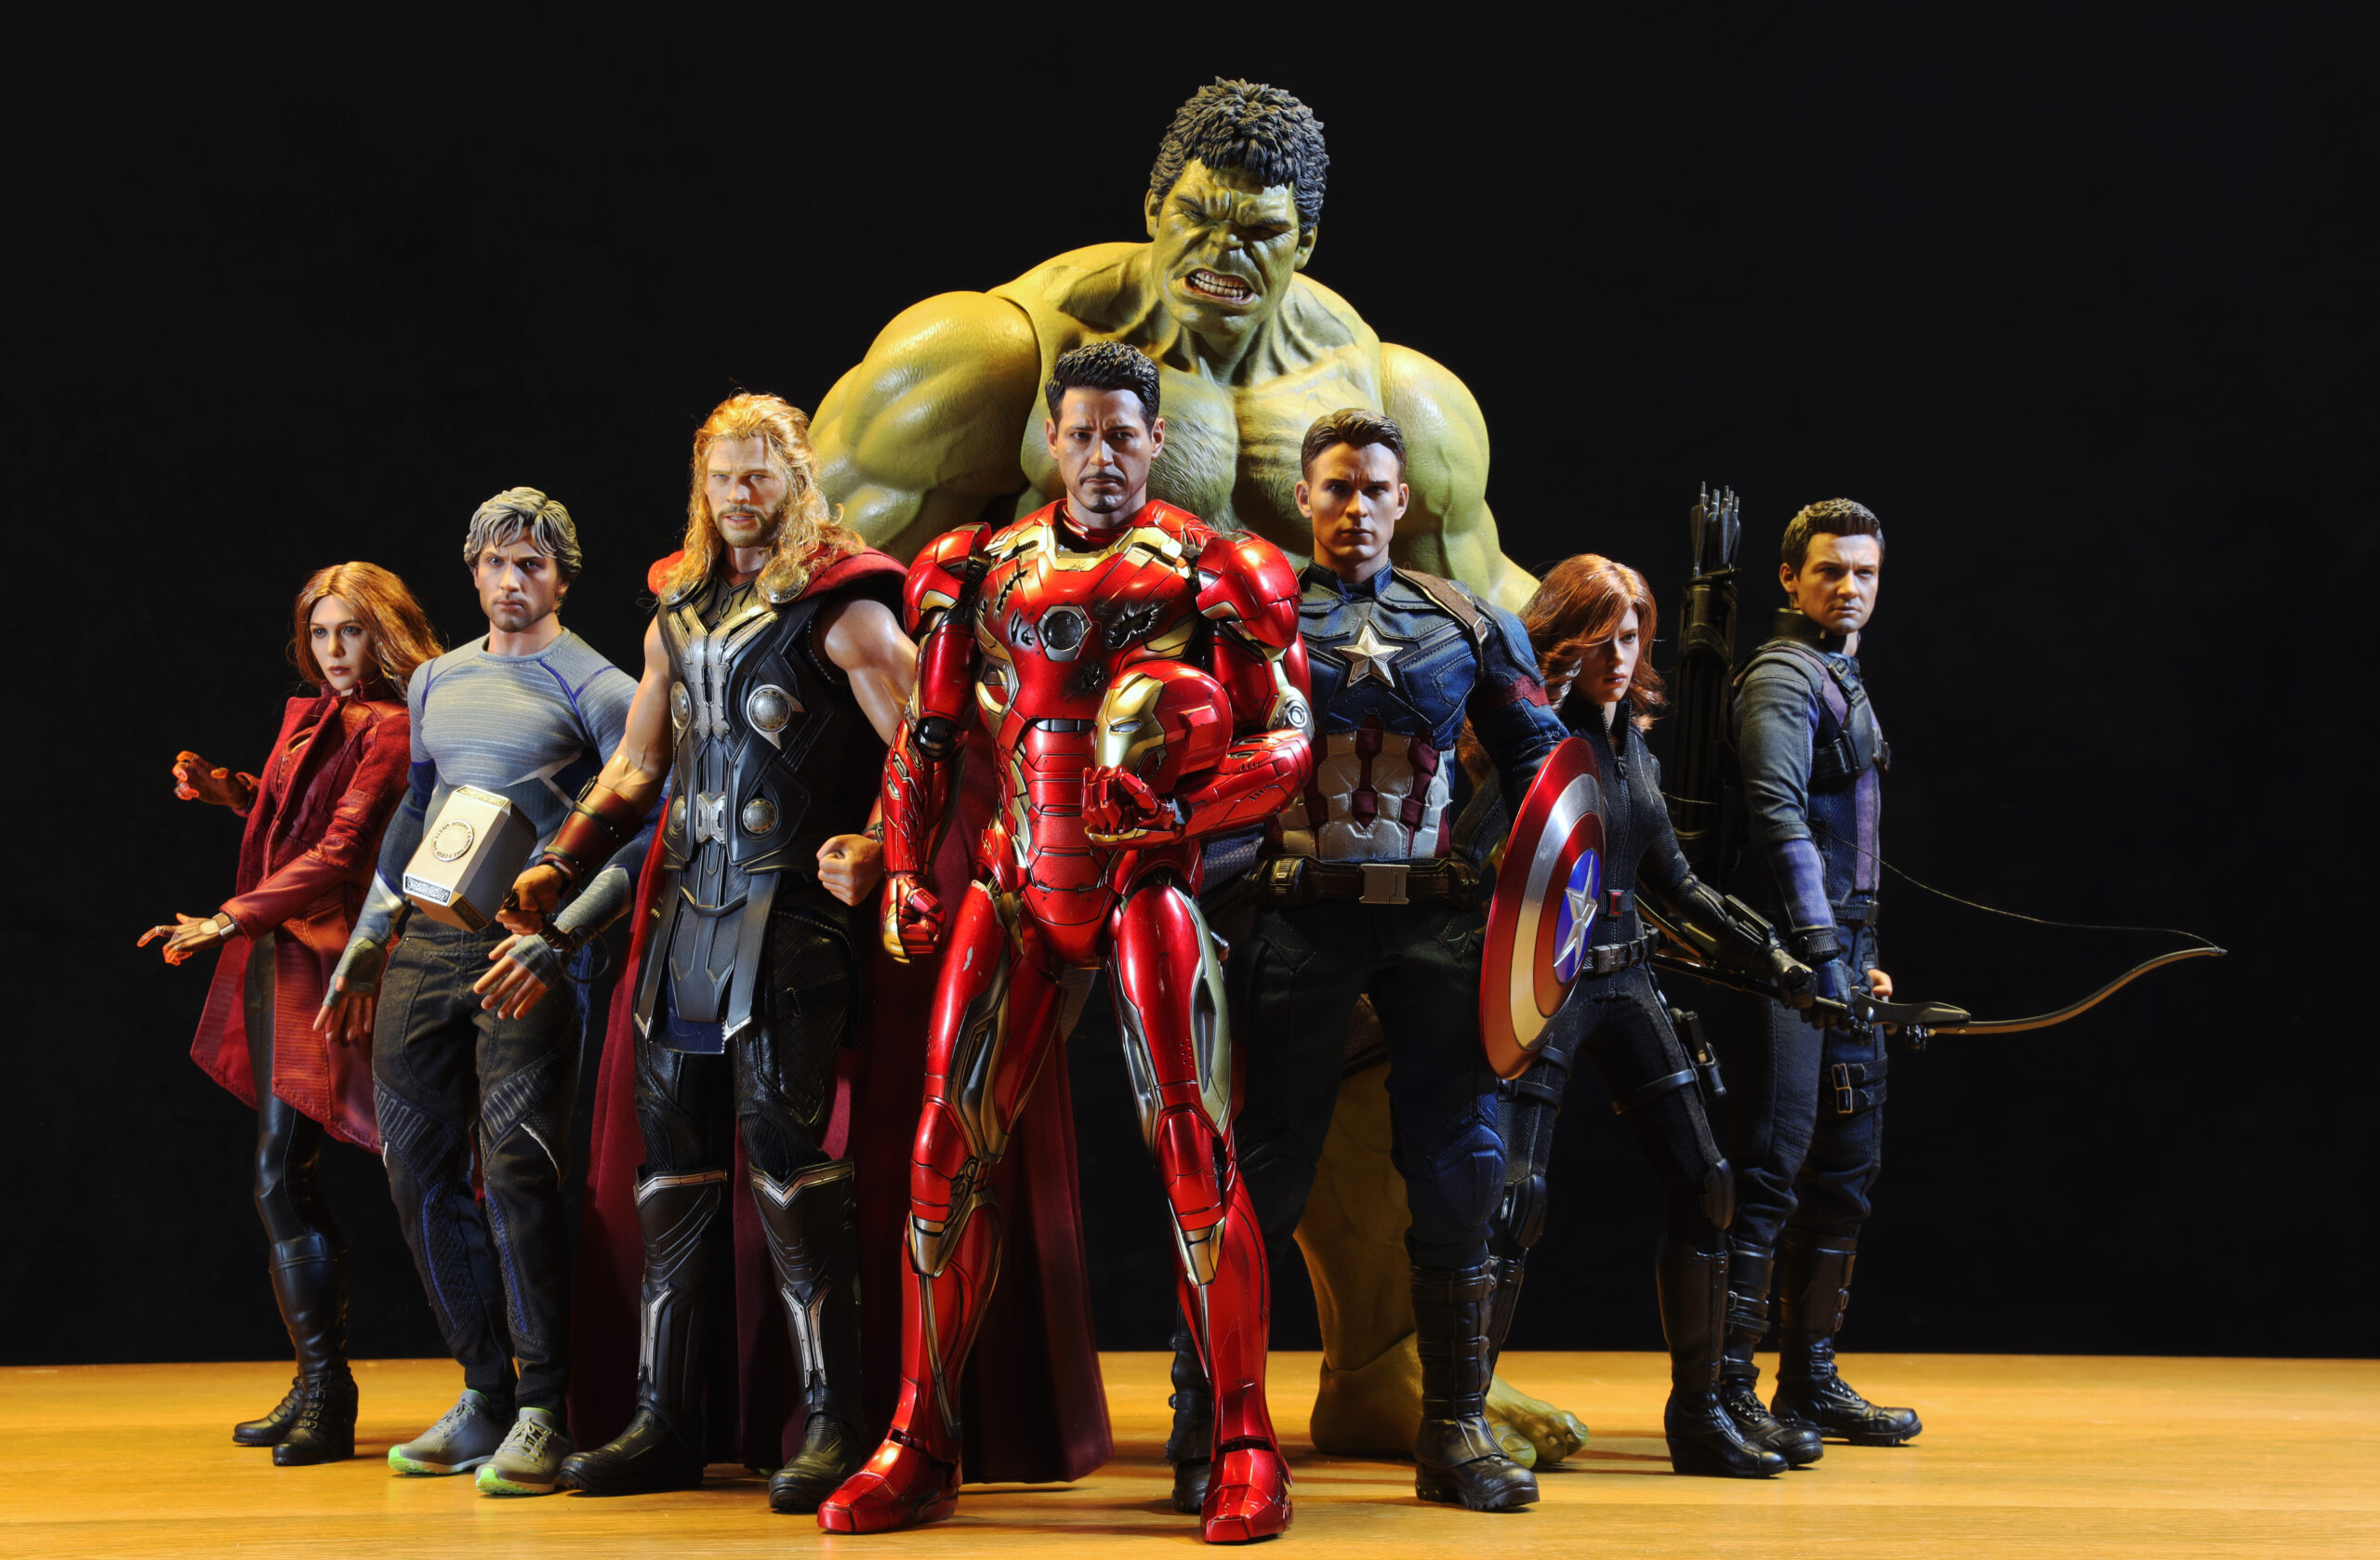 Photo of Avengers Superheroes - Pop Culture Allusions